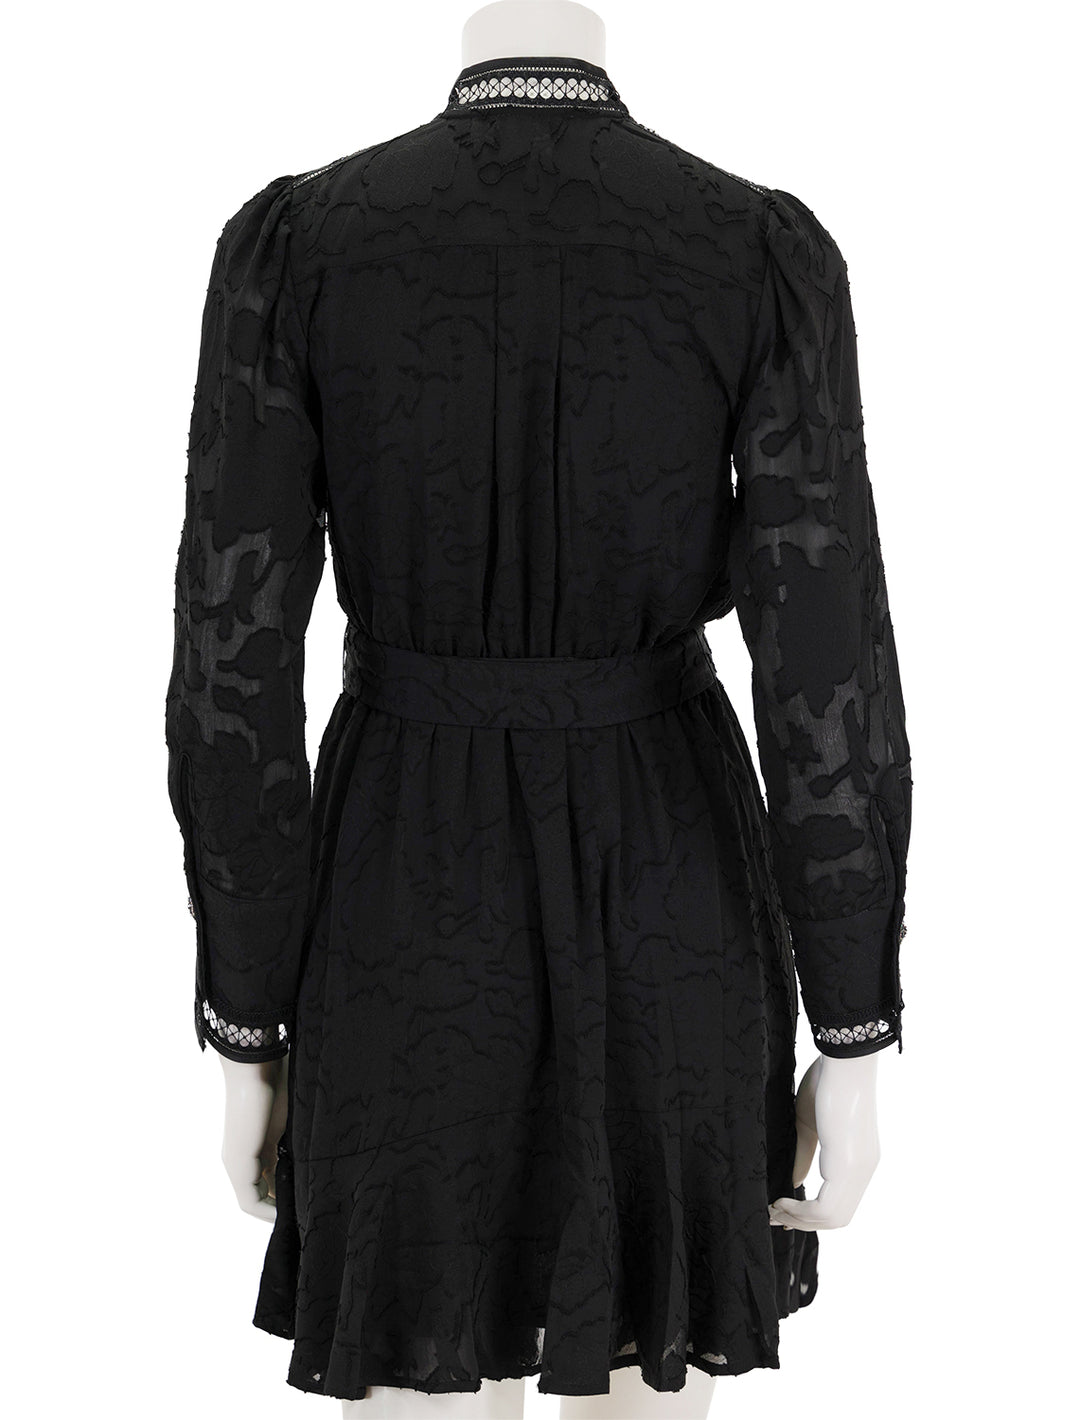 Back view of Suncoo Paris' Charly Dress in Noir.